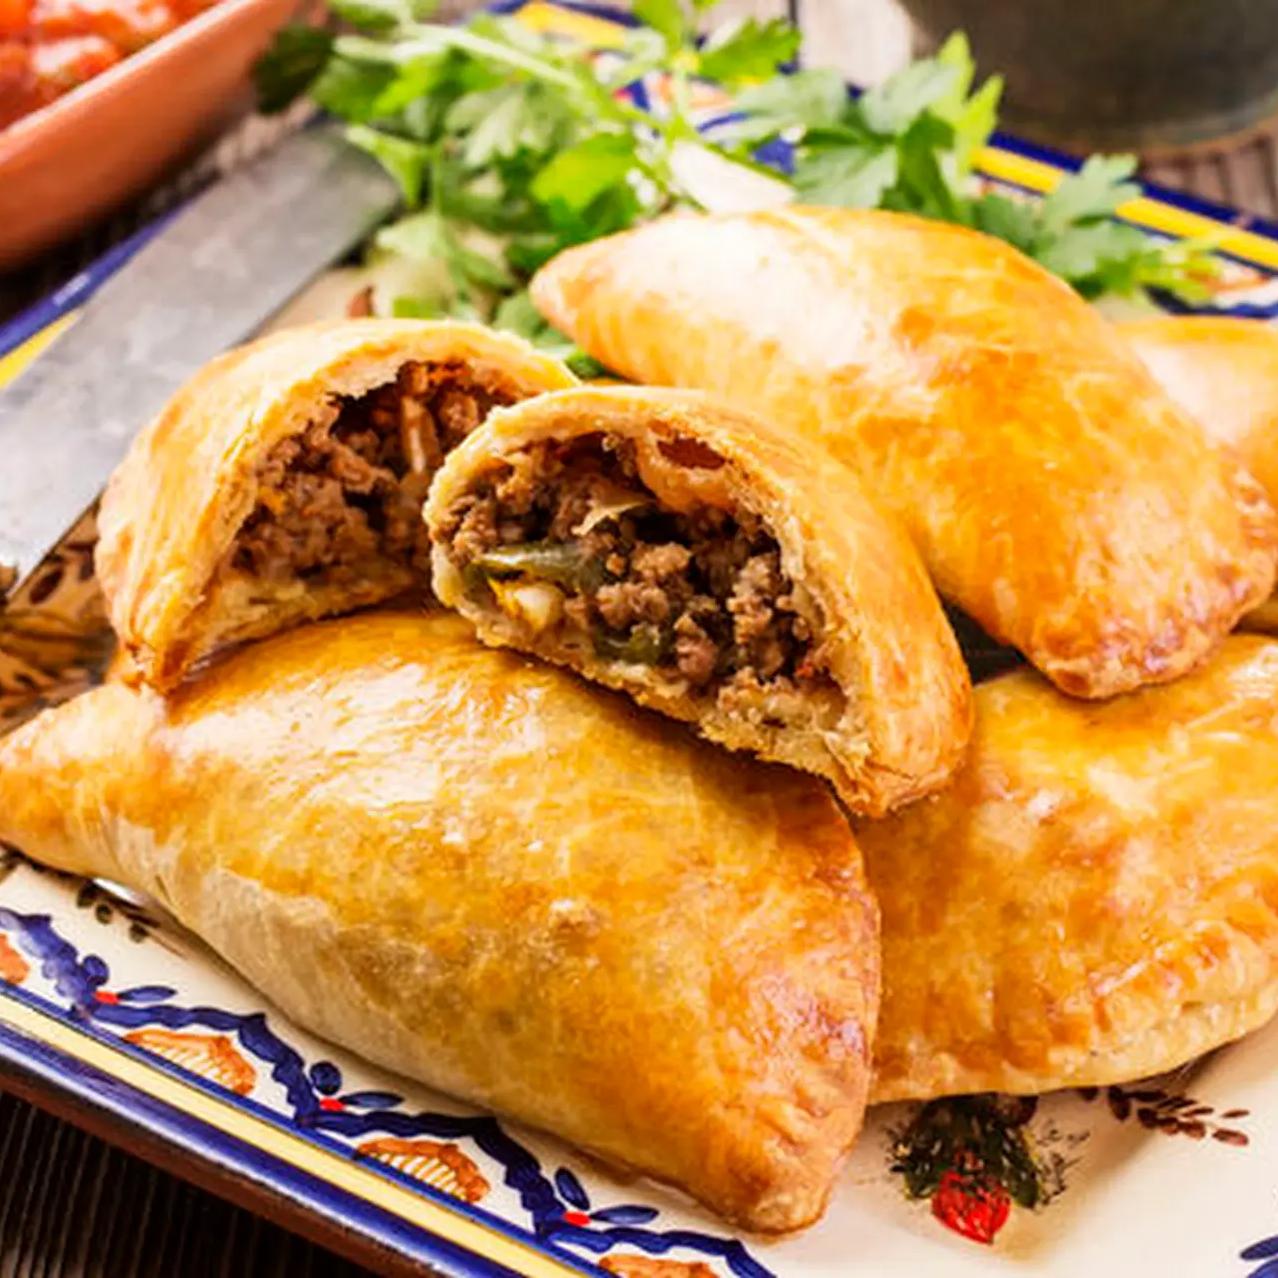  These empanadas are perfect for a quick snack or a party appetizer.